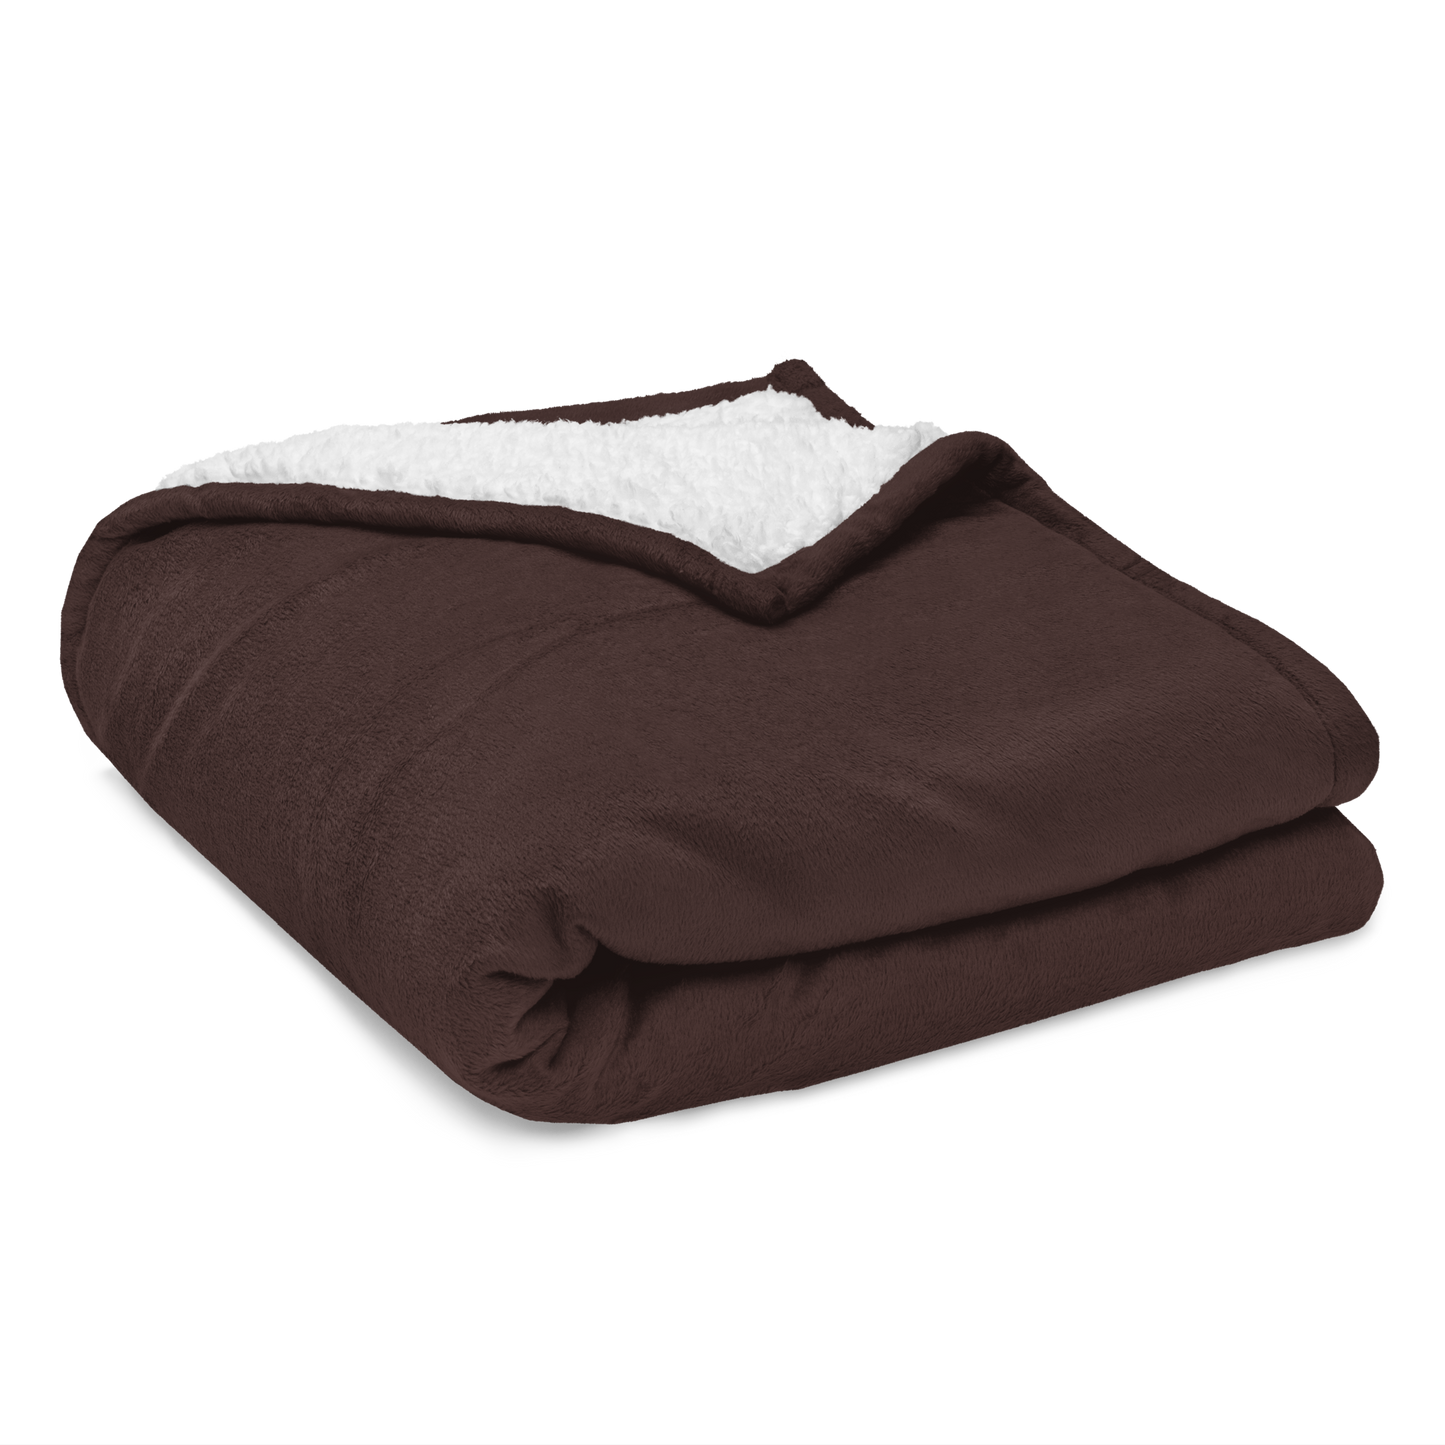 YHM Designs - YUL Montreal Premium Sherpa Blanket - Crossed-X Design with Airport Code and Vintage Propliner - White Embroidery - Image 09